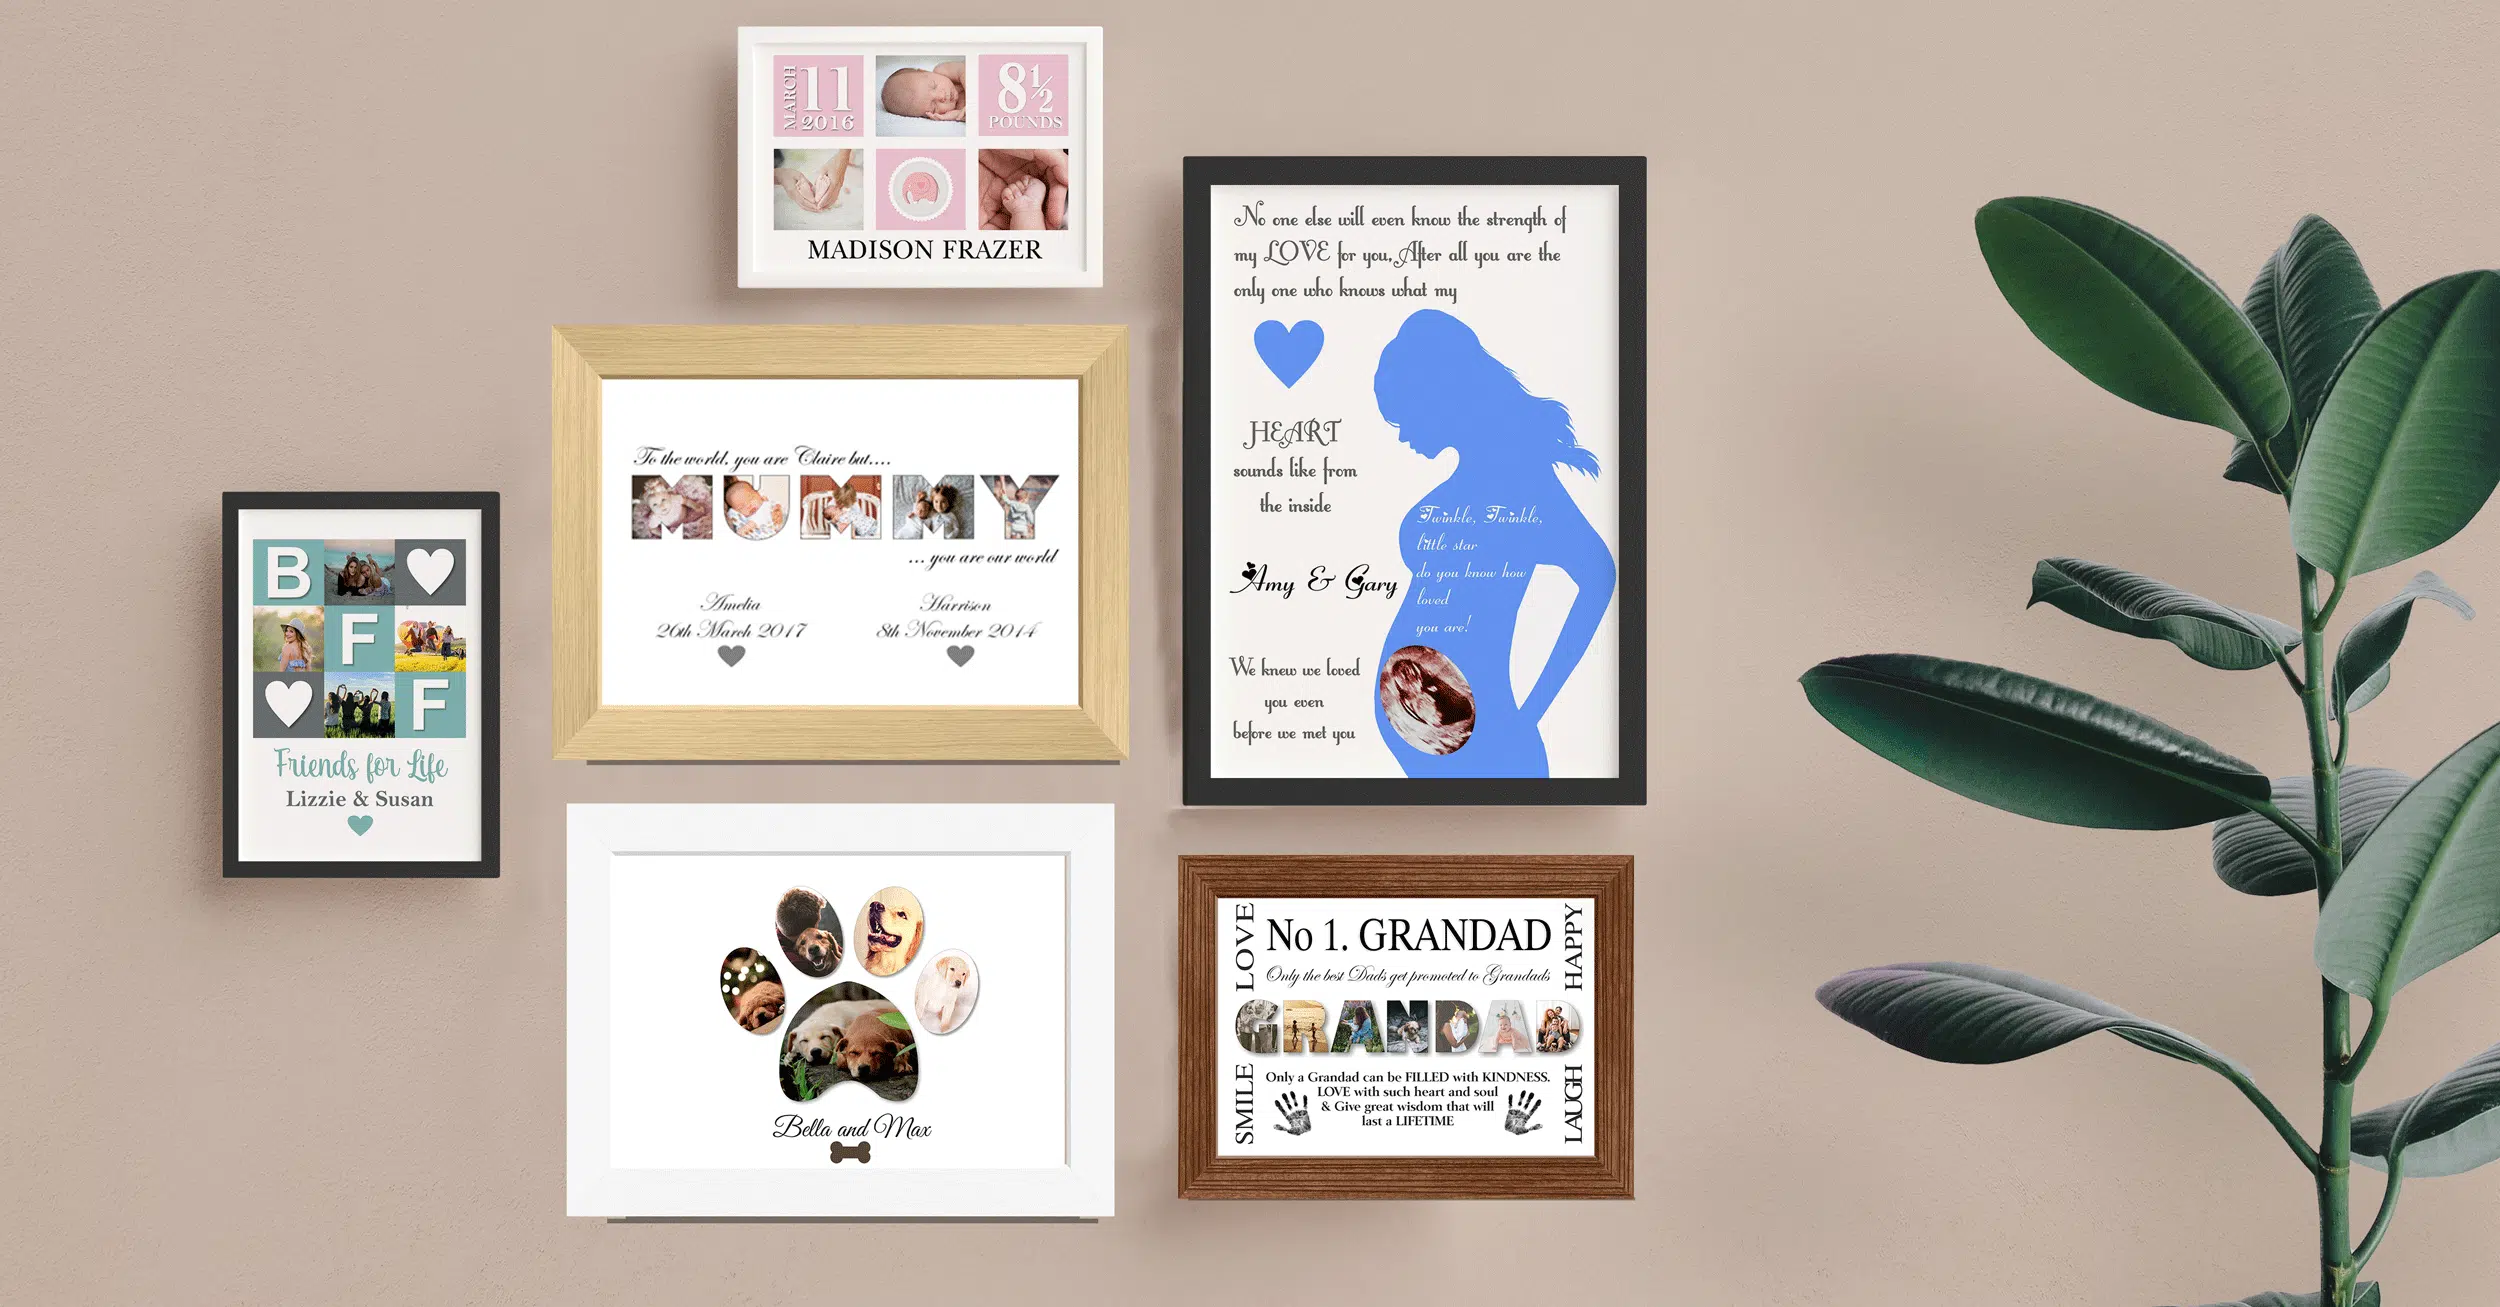 Personalised Photo Gifts